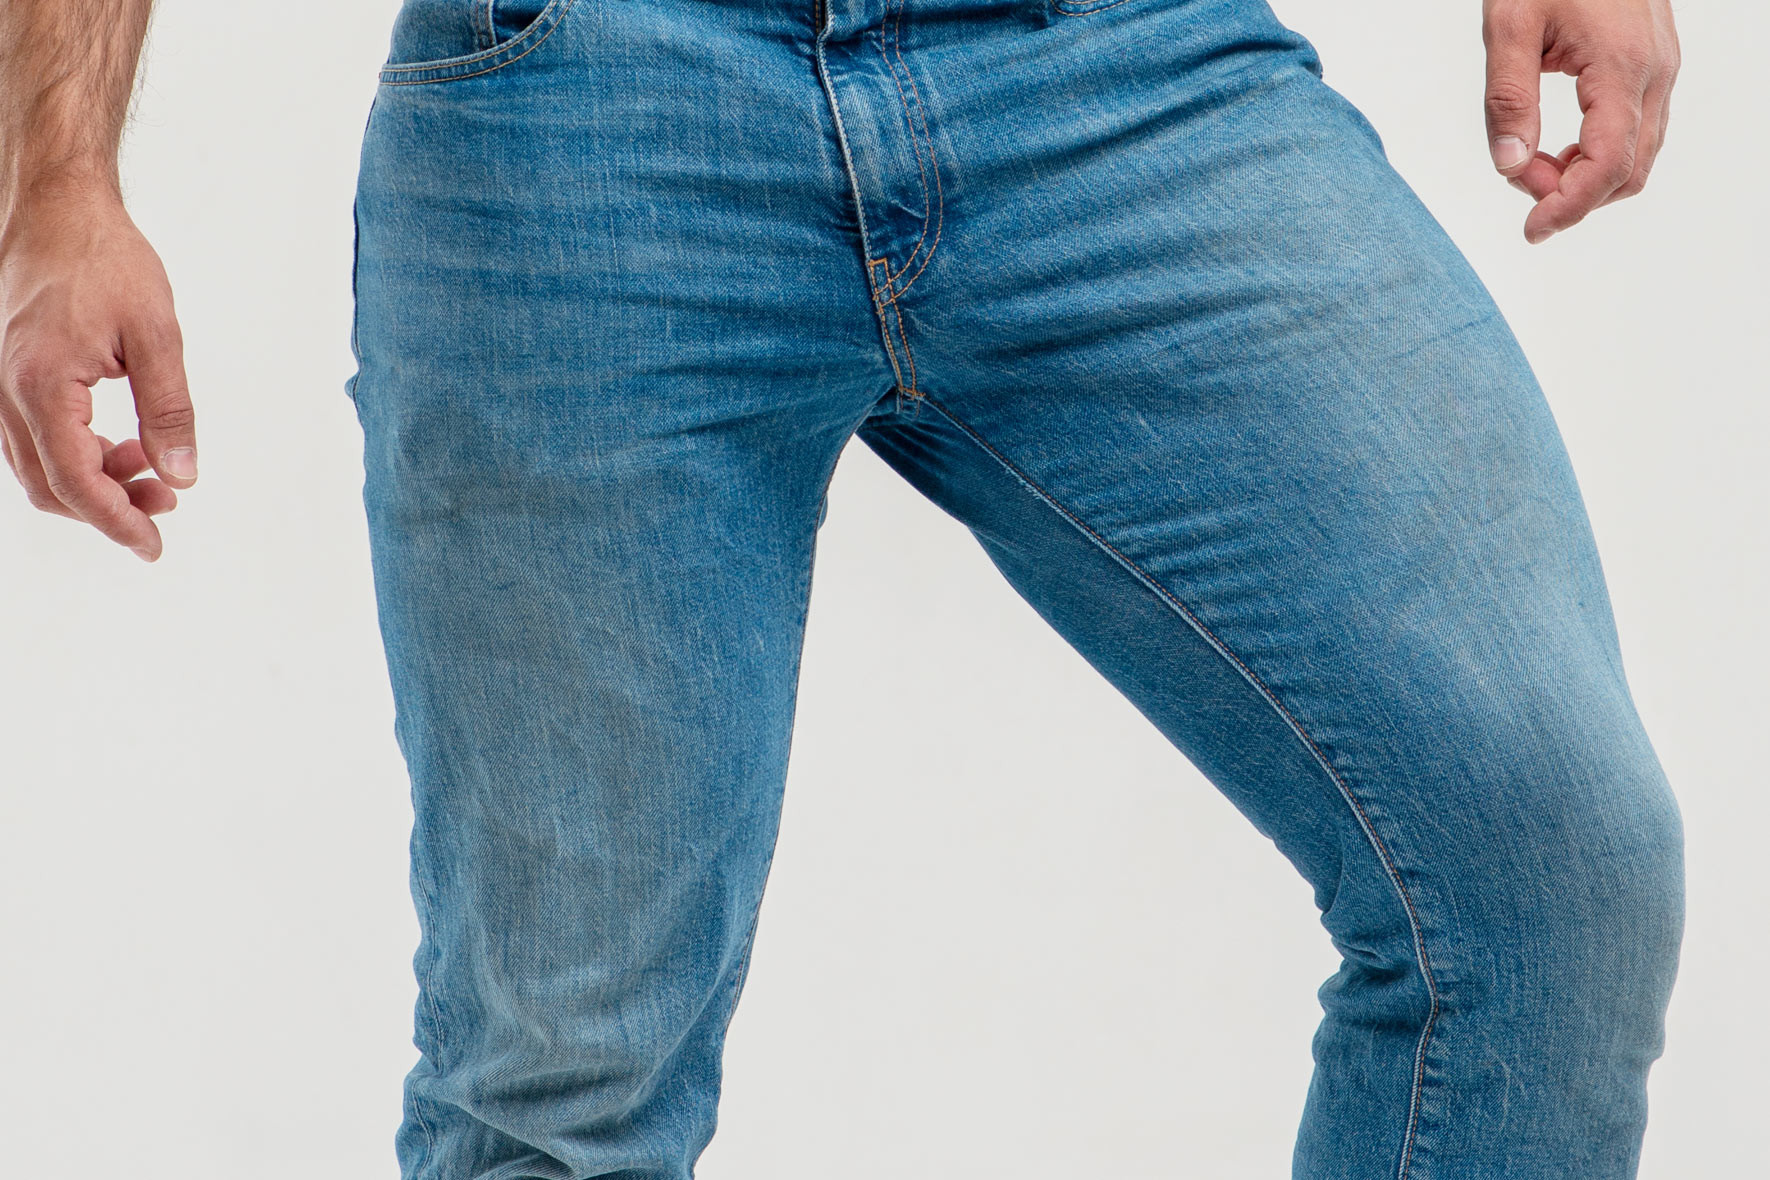 Jeans for men with big thighs - Jeans for athletes